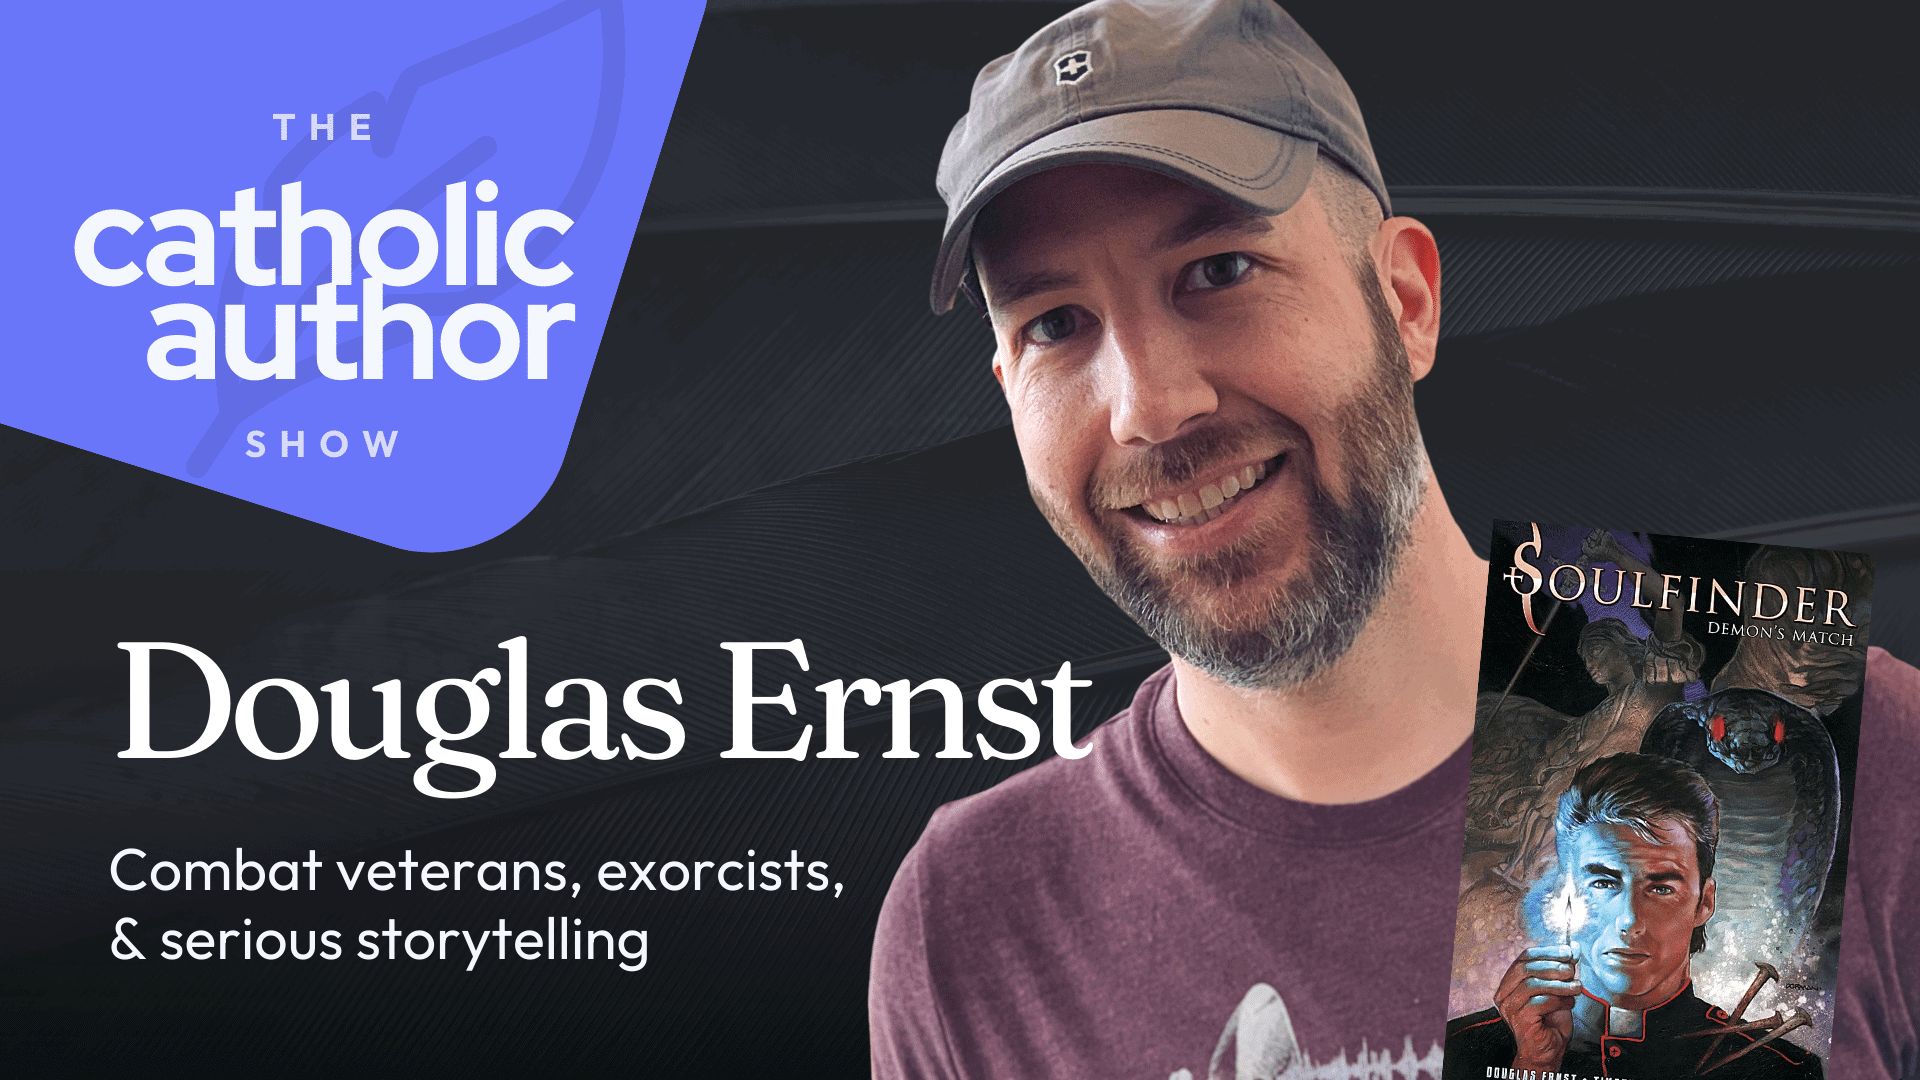 Combat veterans, exorcists, & serious storytelling with Douglas Ernst